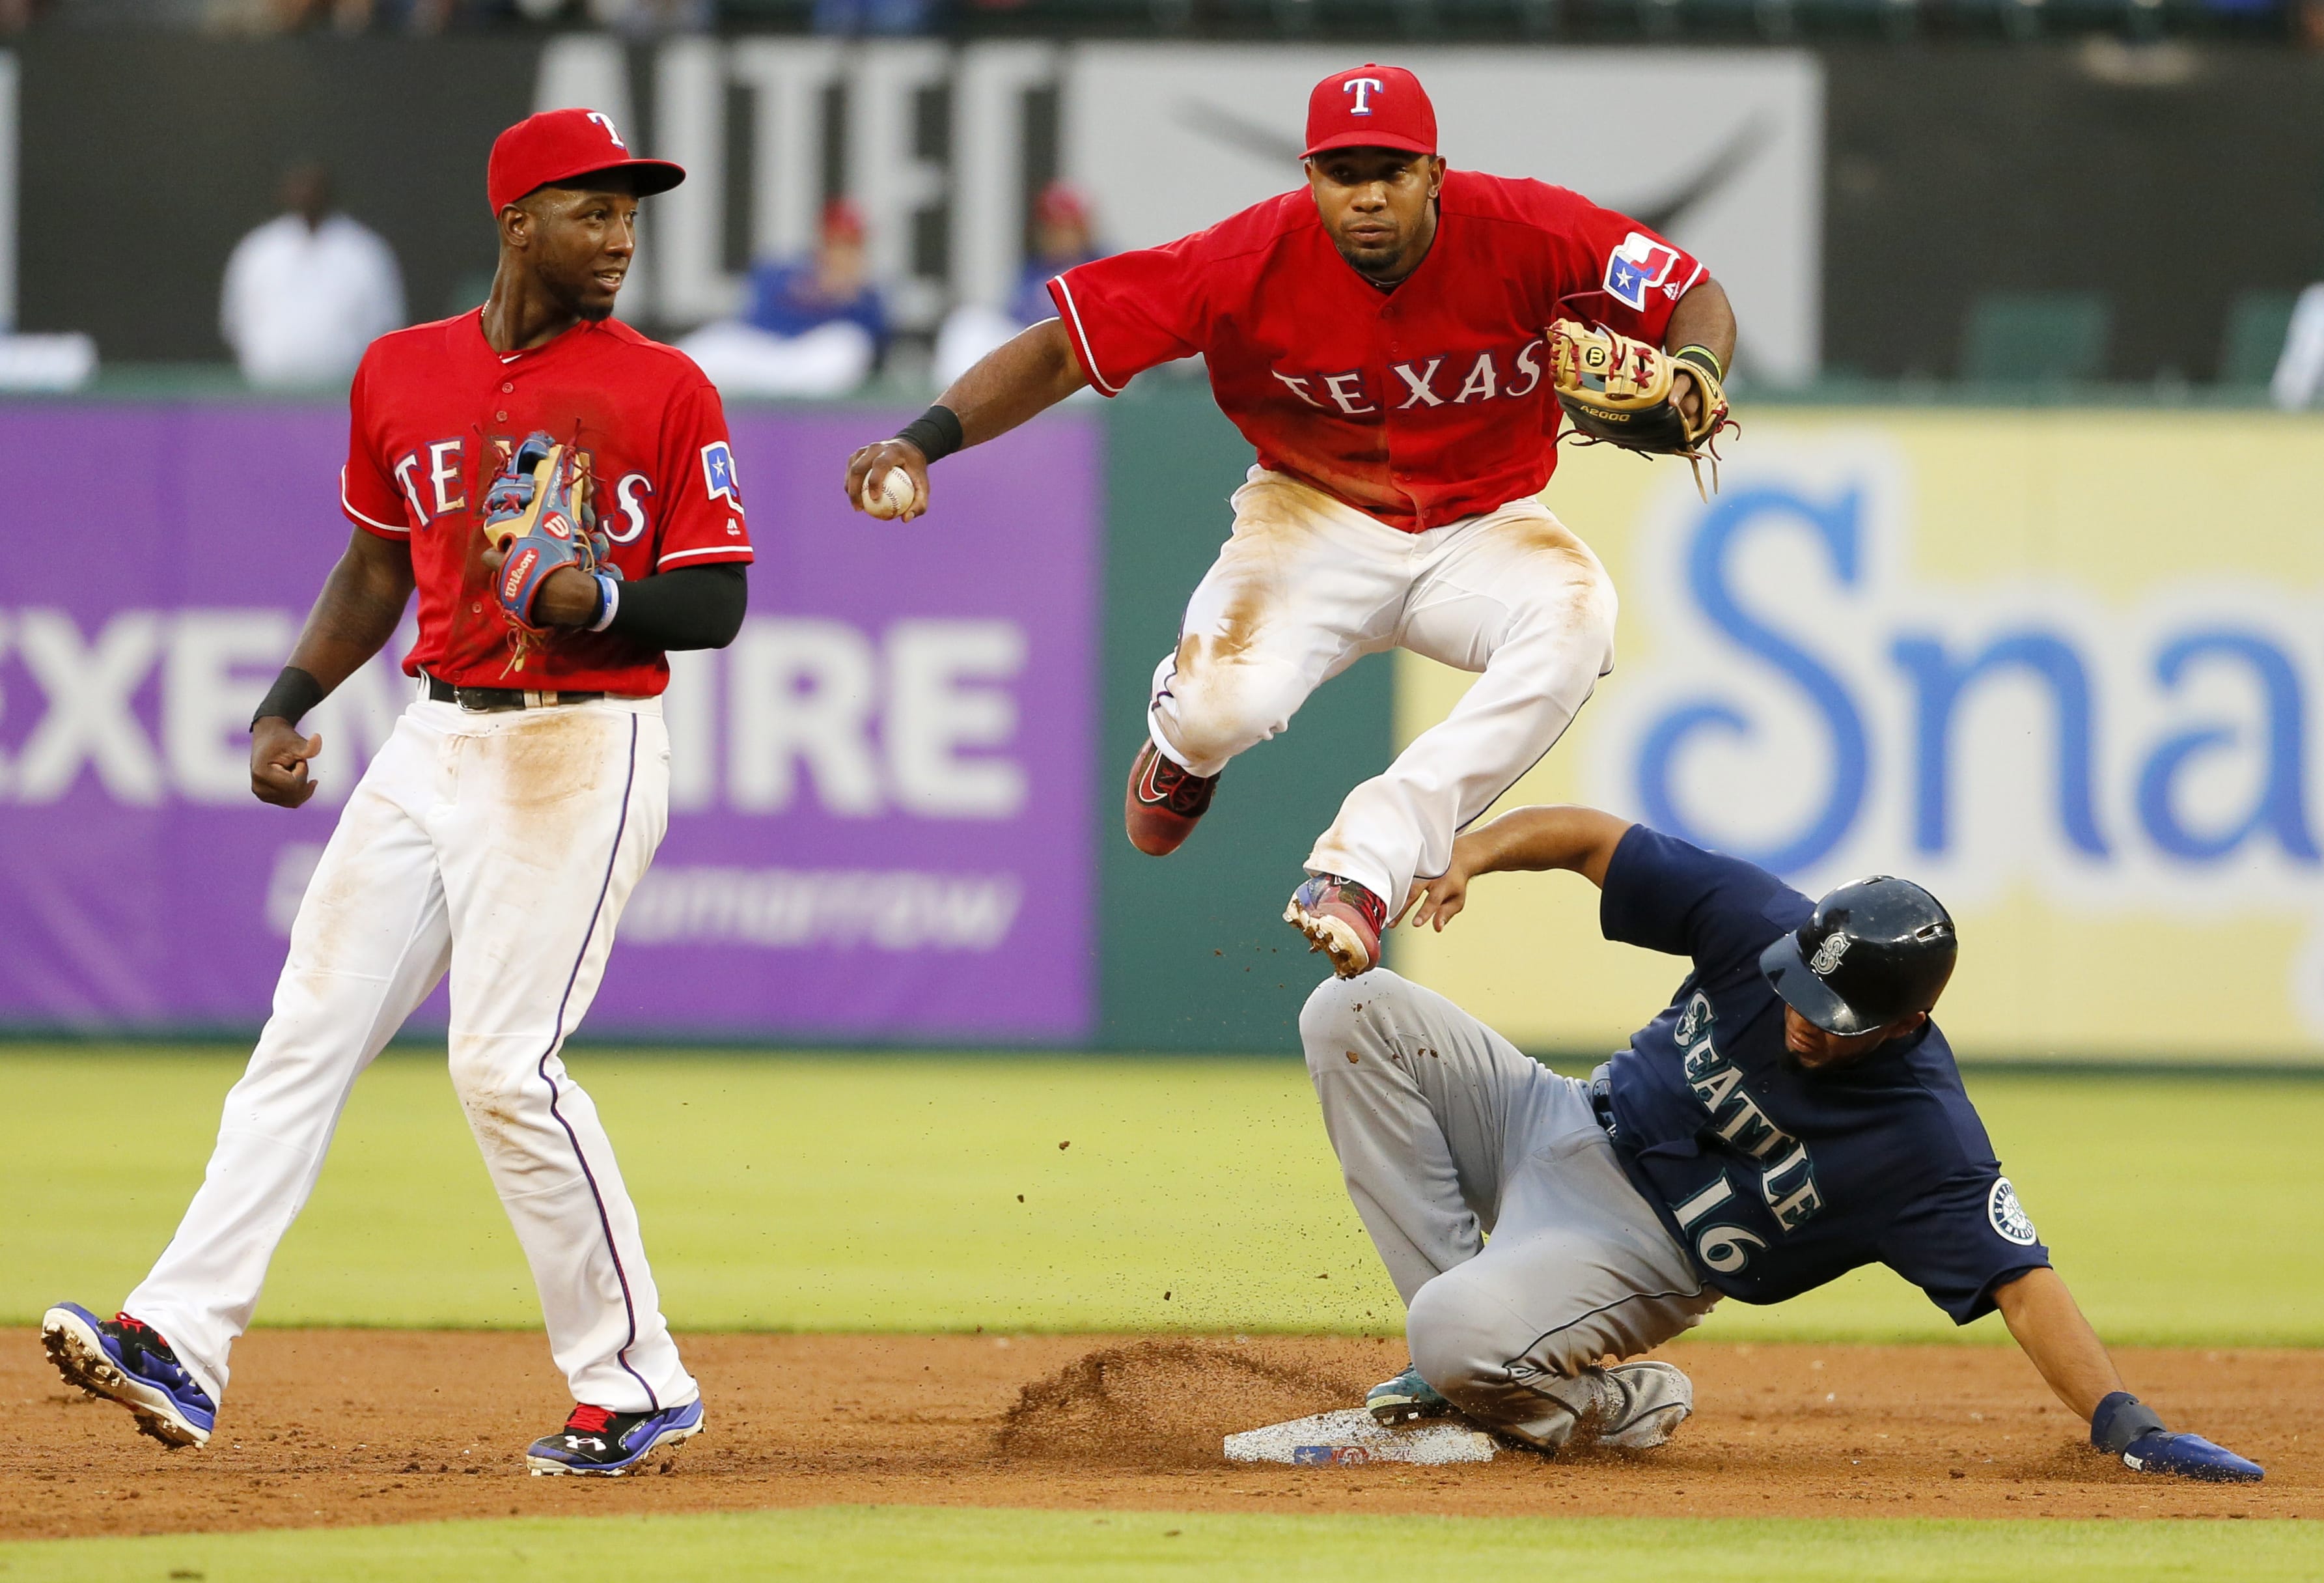 Texas Rangers second baseman Jurickson Profar, left watches as shortstop Elvis Andrus (1) leaps over a sliding Seattle Mariners' Luis Sardinas (16) who was forced by Andrus at second on a fielders choice hit by Norichika Aoki in the third inning of a baseball game on, Friday, June 3, 2016, in Arlington, Texas. Aoki was safe at first on the play.